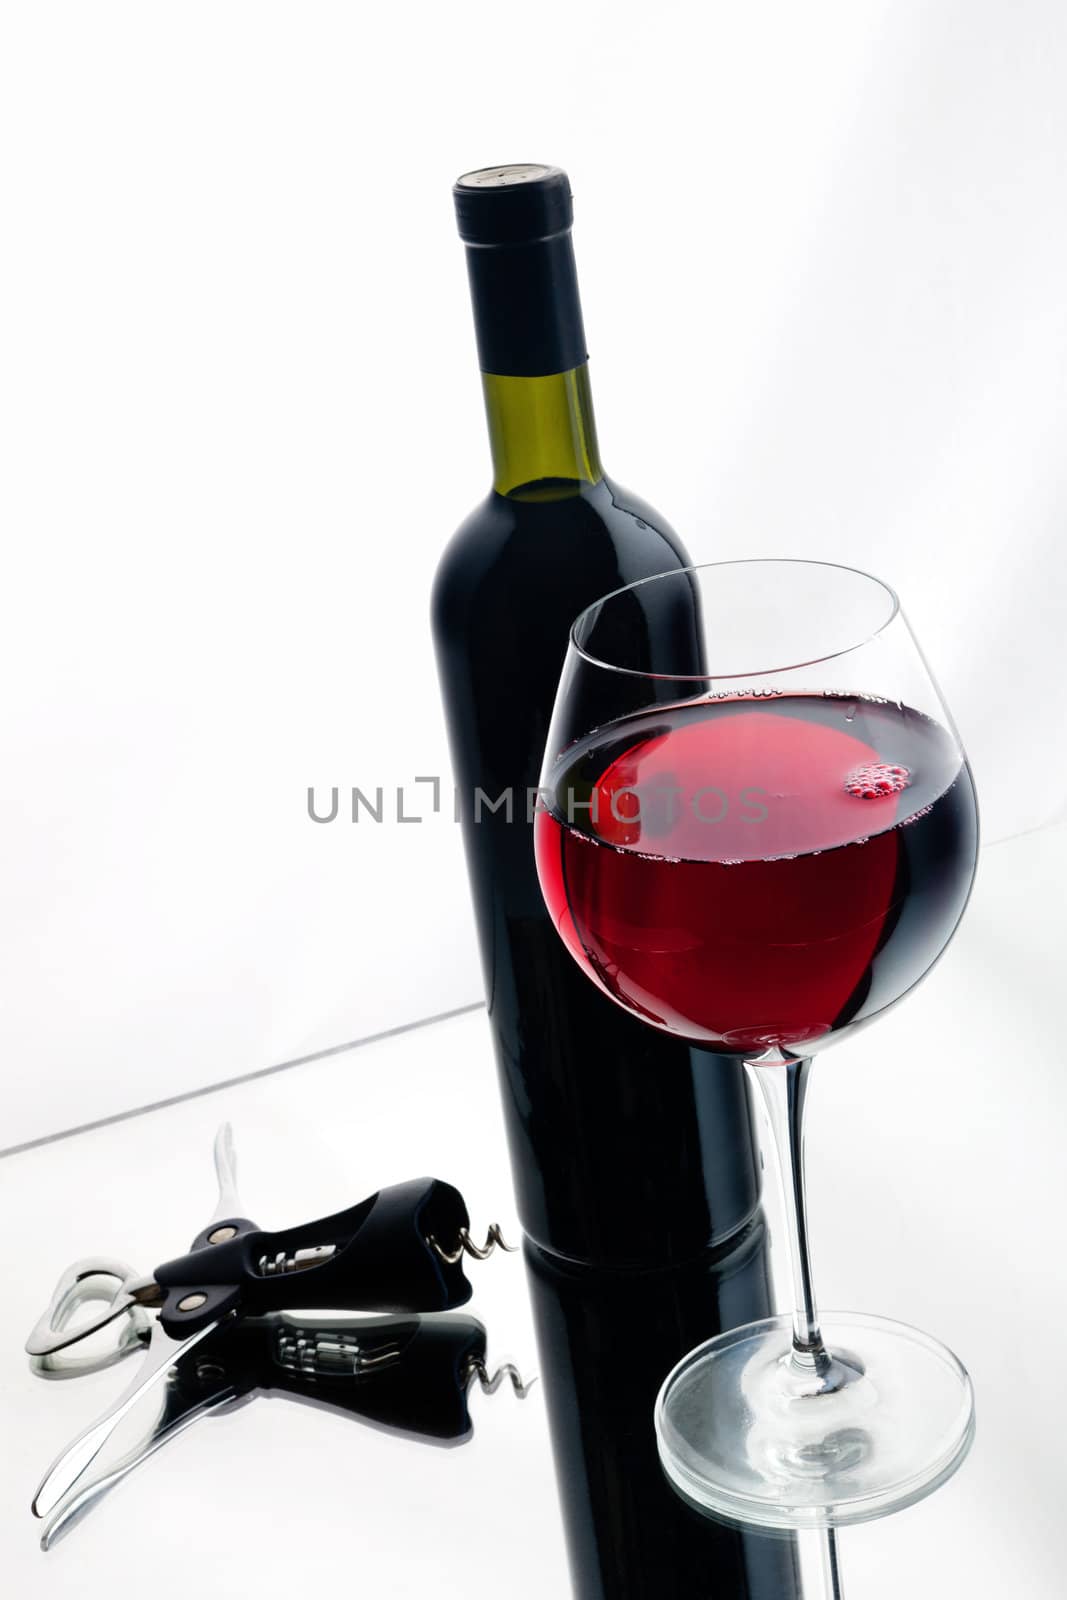 Still-life with bottle and glass of red wine over white background.